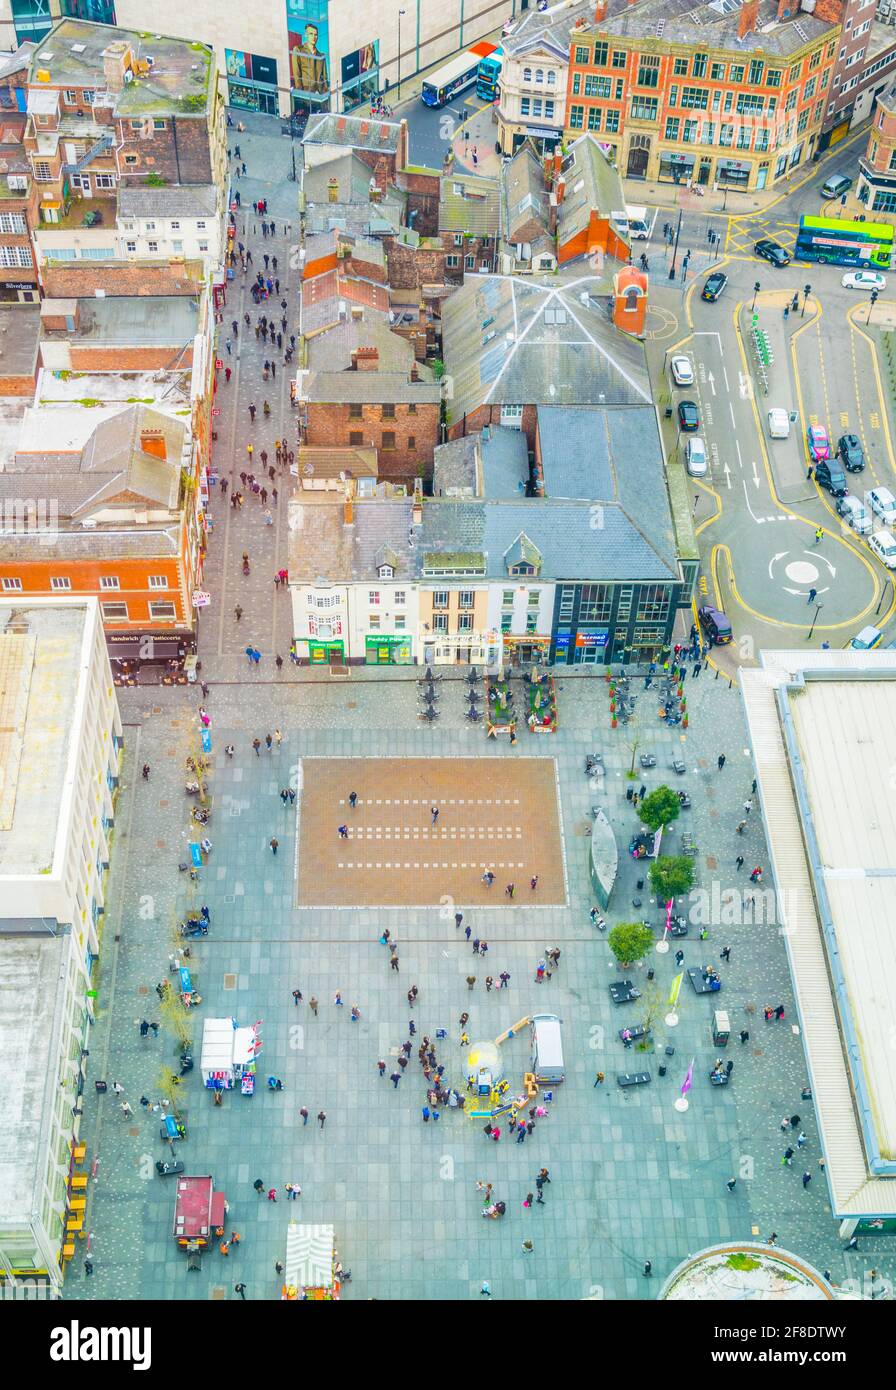 LIVERPOOL, UNITED KINGDOM, APRIL 7, 2017: Aerial view of the Williamson square in Liverpool, England Stock Photo